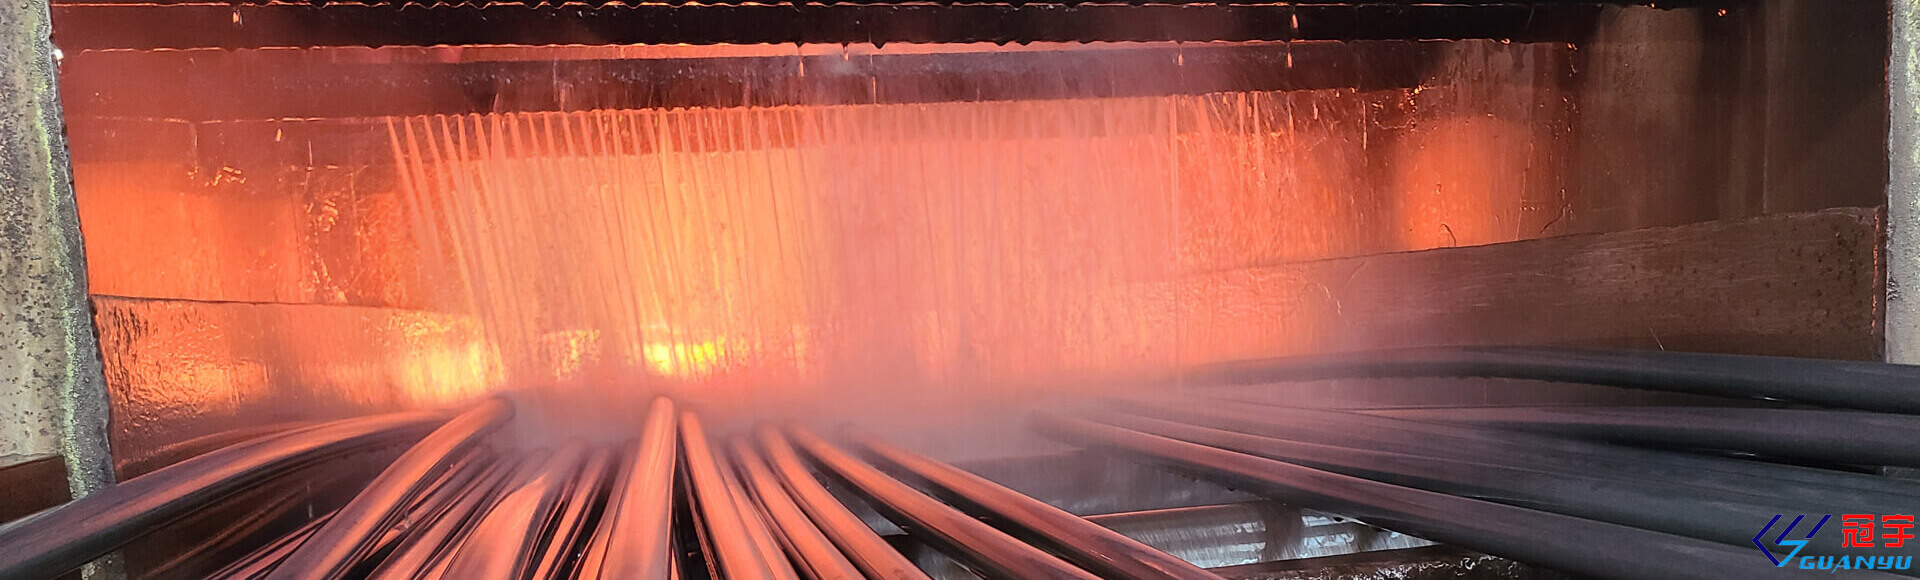 Stainless Steel Tubing Solution Annealing and Quenching